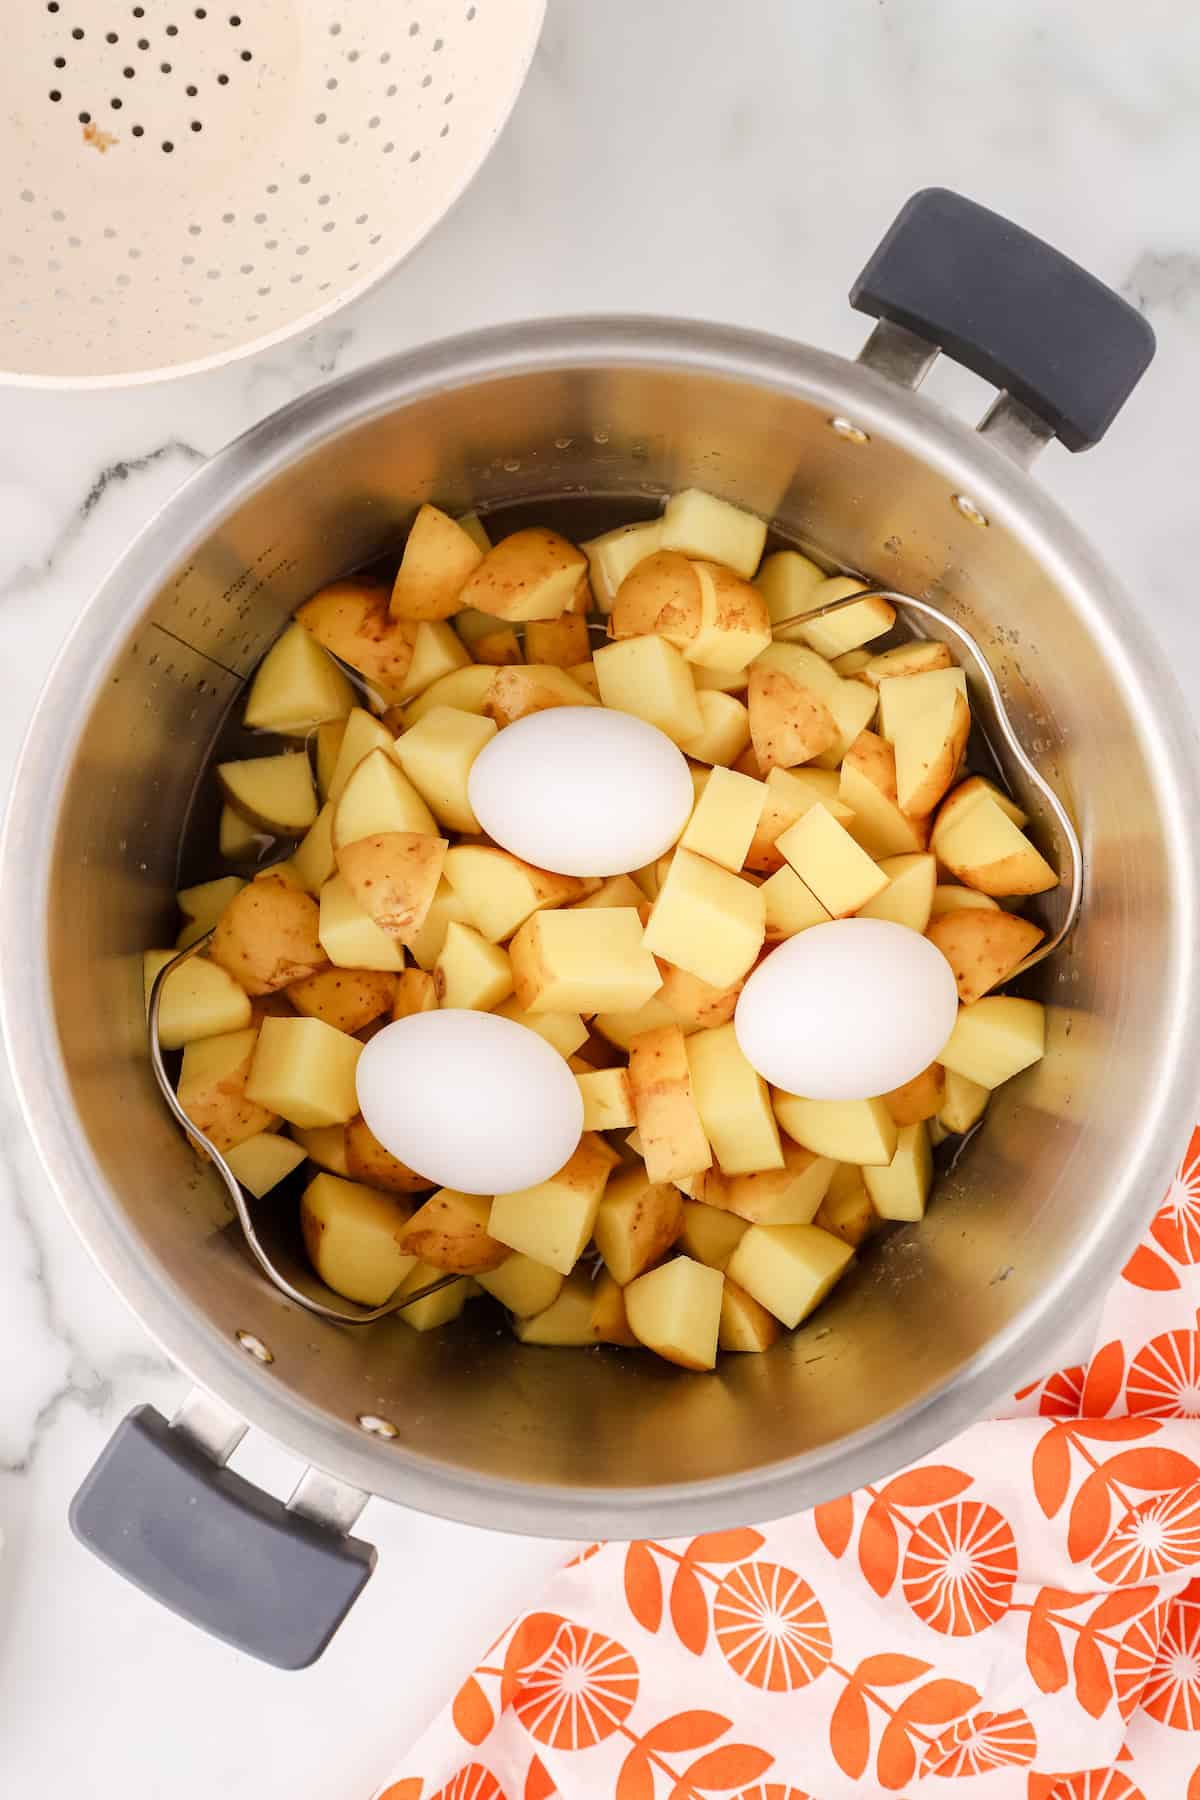 add the potatoes and eggs to the Instant Pot